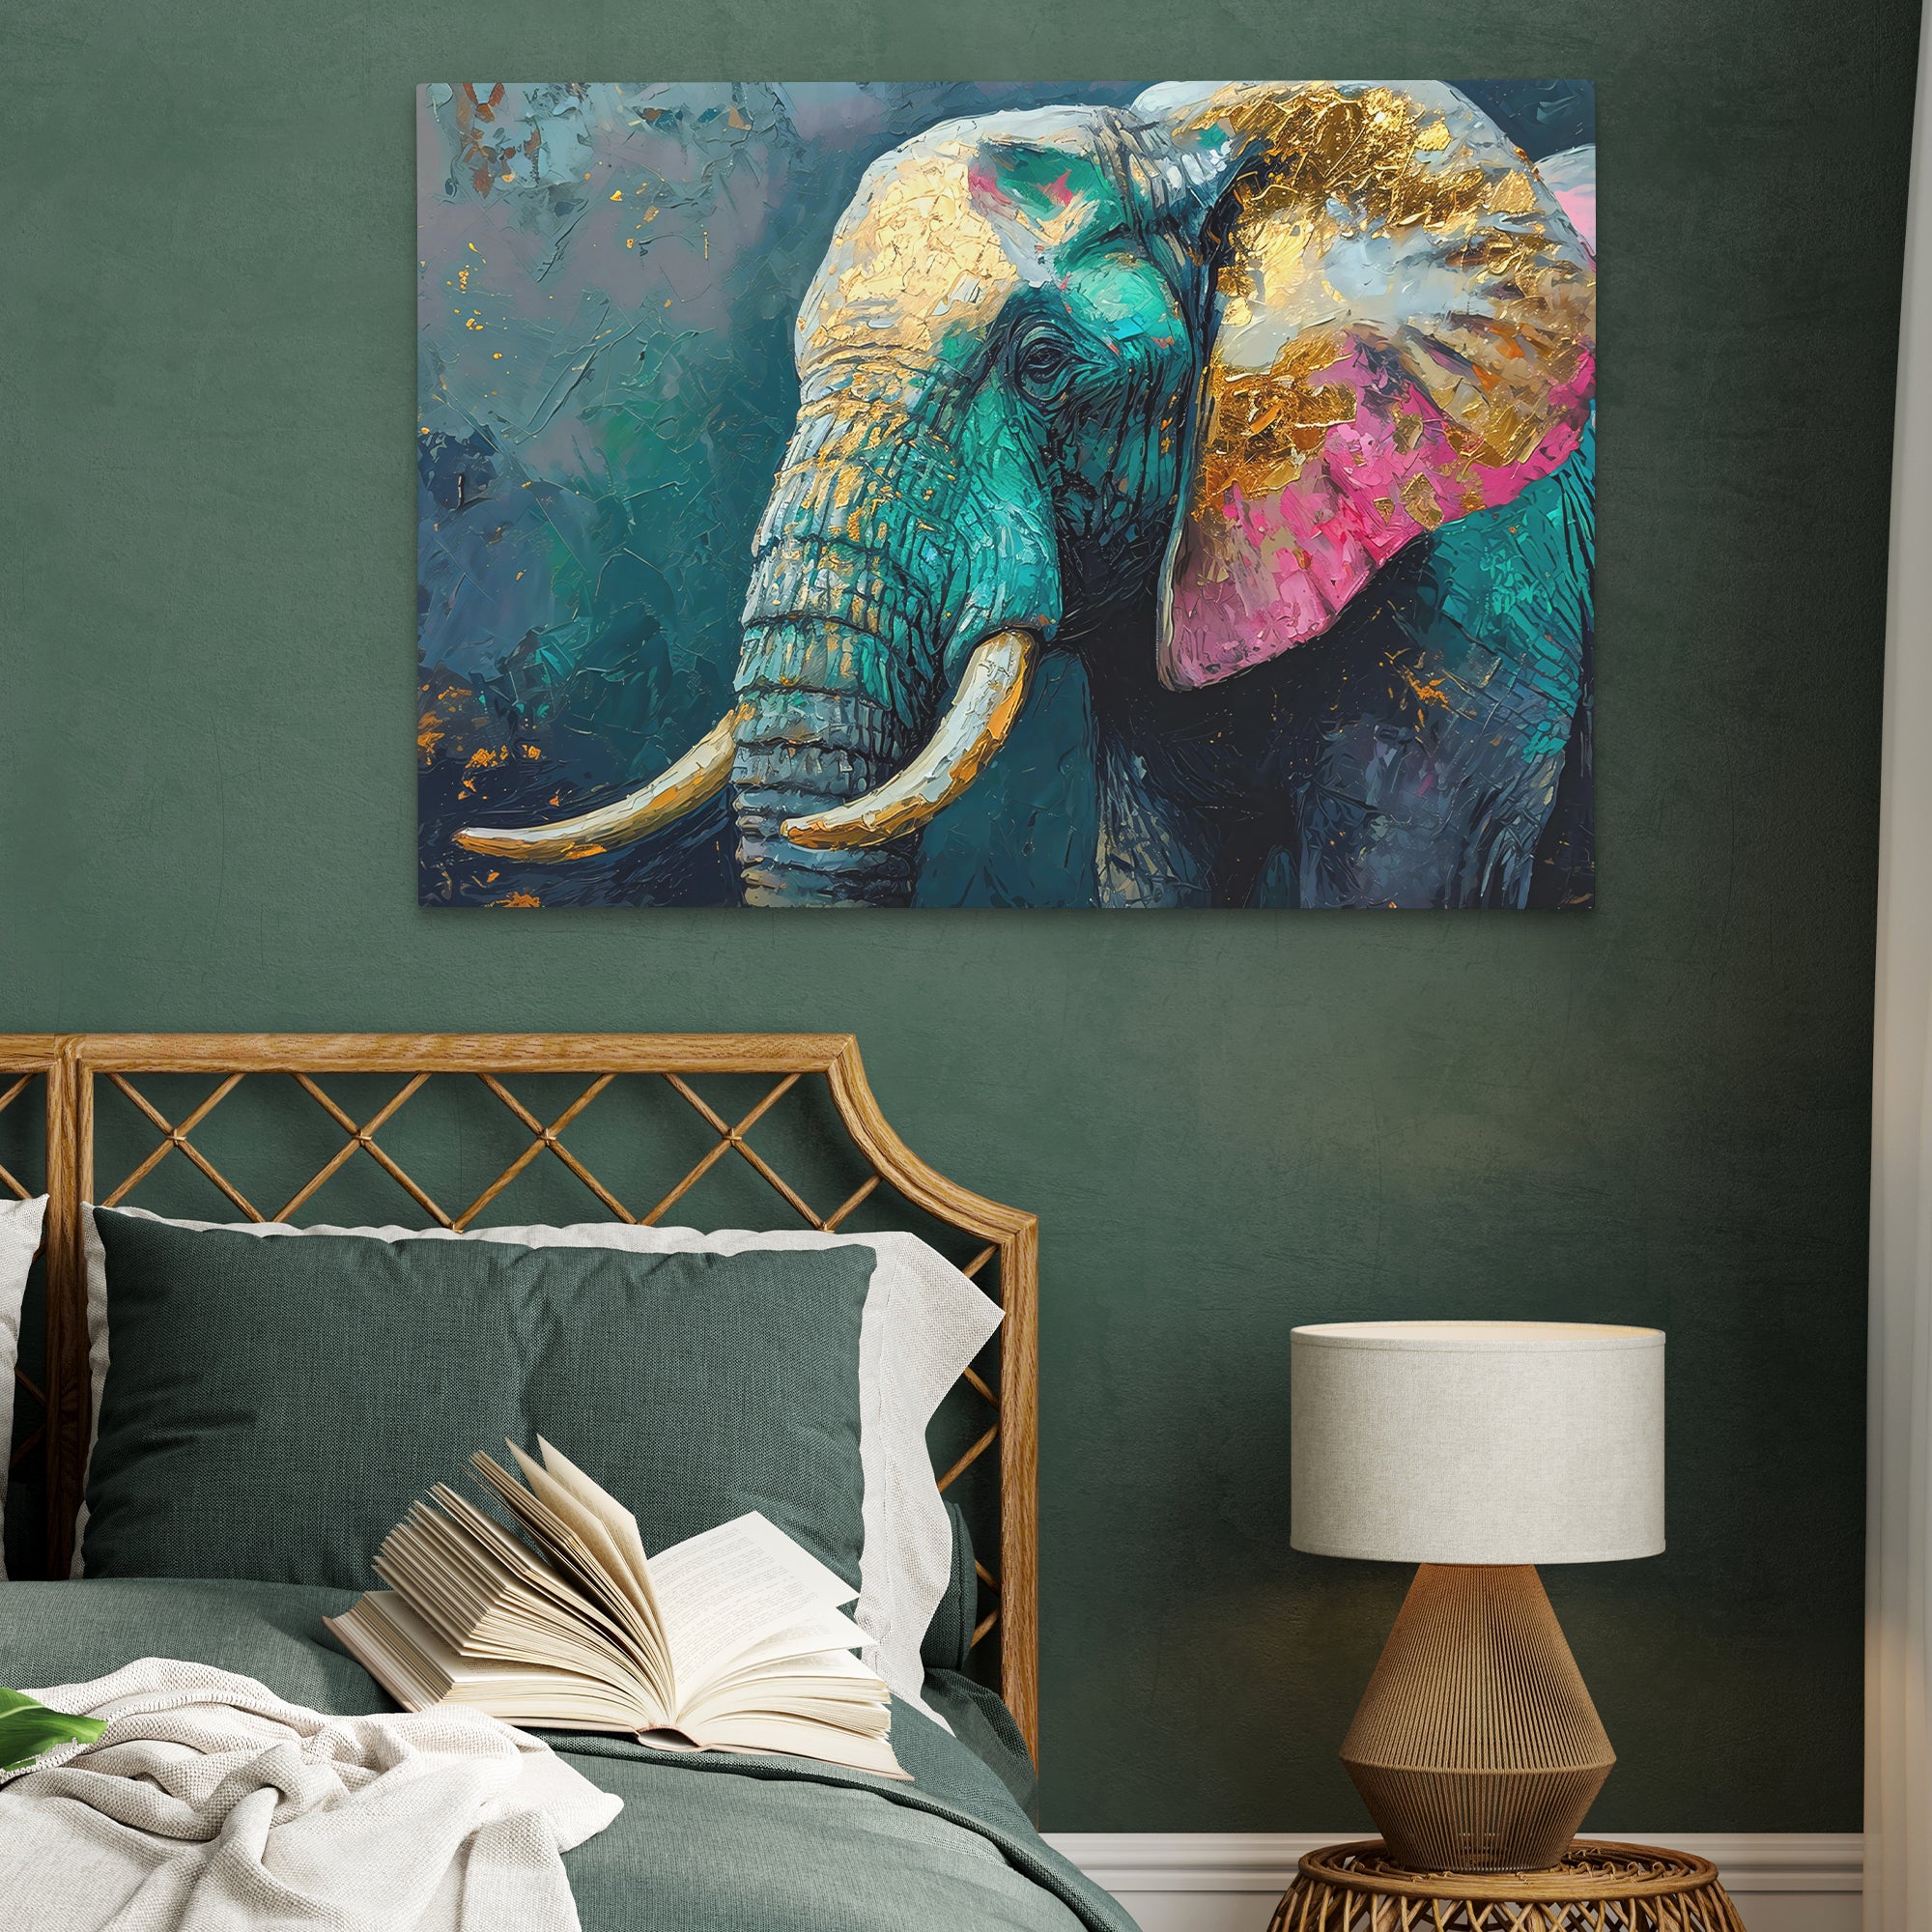 a painting of an elephant with gold tusks